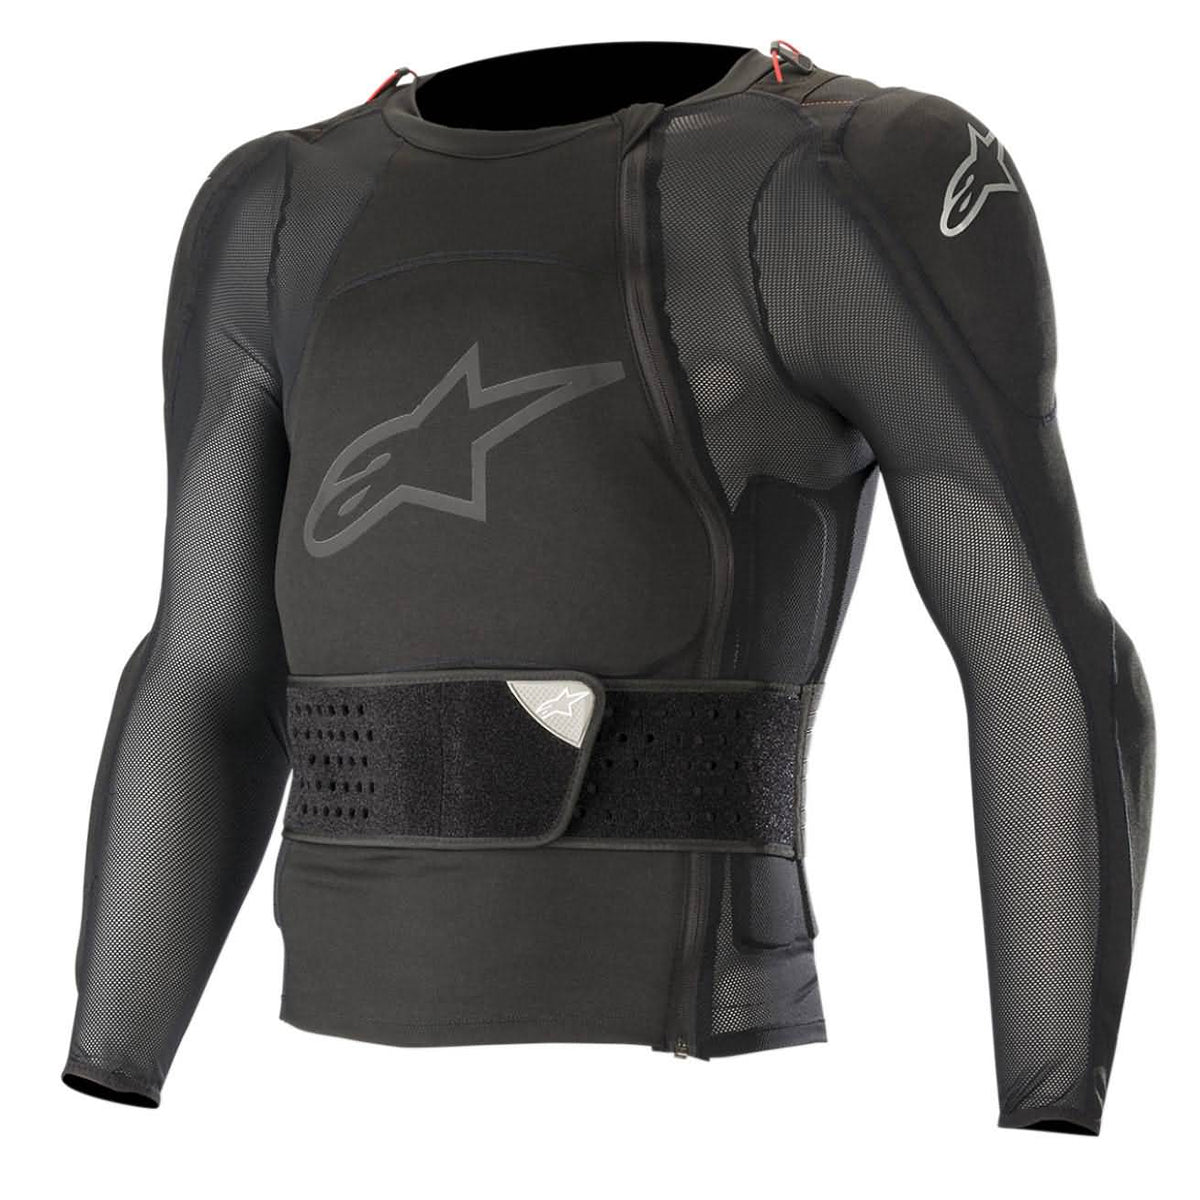 Alpinestars Sequence Protector Jacket Adult Off-Road Body Armor 